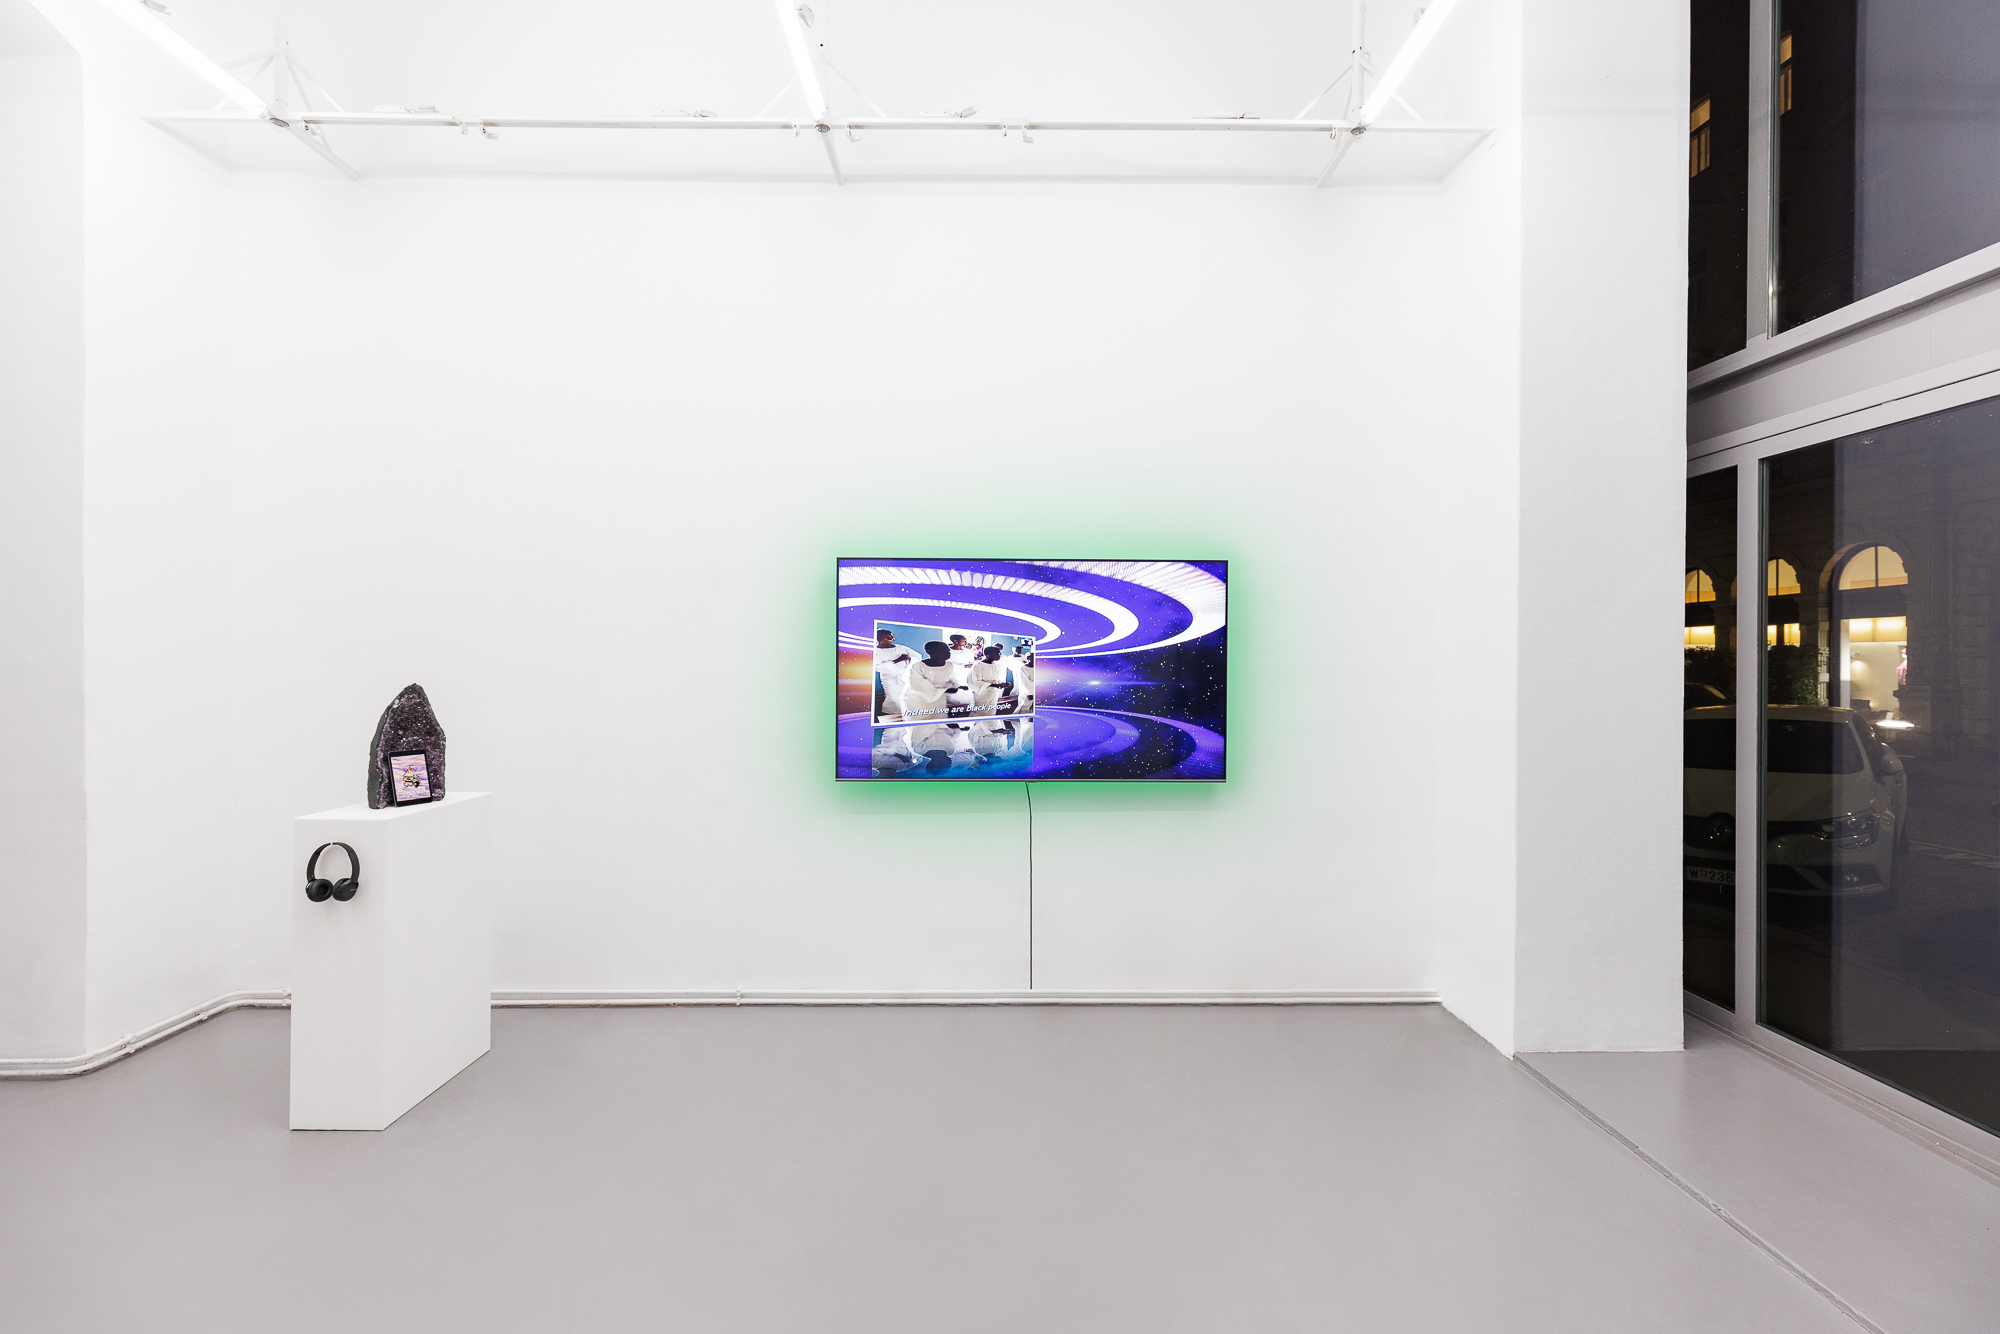 Installation view "BODY CARE" with works by Tabita Rezaire, curated by Madeleine Freund, on view 9 November â€“ 3 December 2022 at SchleifmÃ¼hlgasse 1, Vienna.